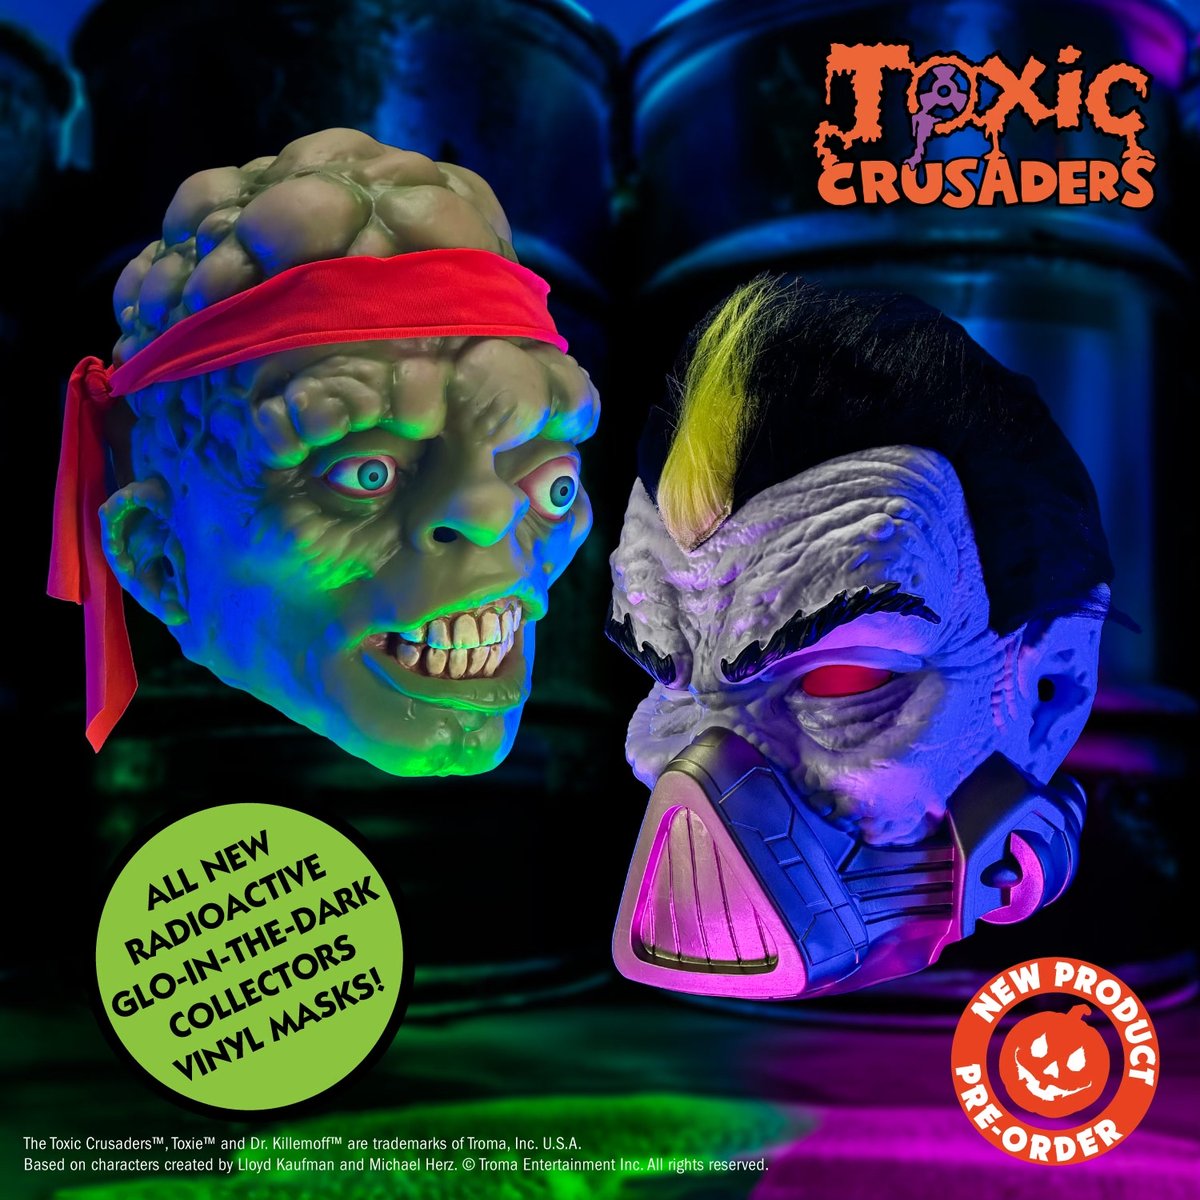 It’s time to get Radioactive Ugly! 

Trick or Treat Studios in association with Troma Entertainment, are totally stoked to bring you this brand new Toxic Crusaders Toxie Mask! 

Pre-order NOW | Only at TrickorTreatStudios.com 

#ToxicCrusaders #TrickorTreatStudios